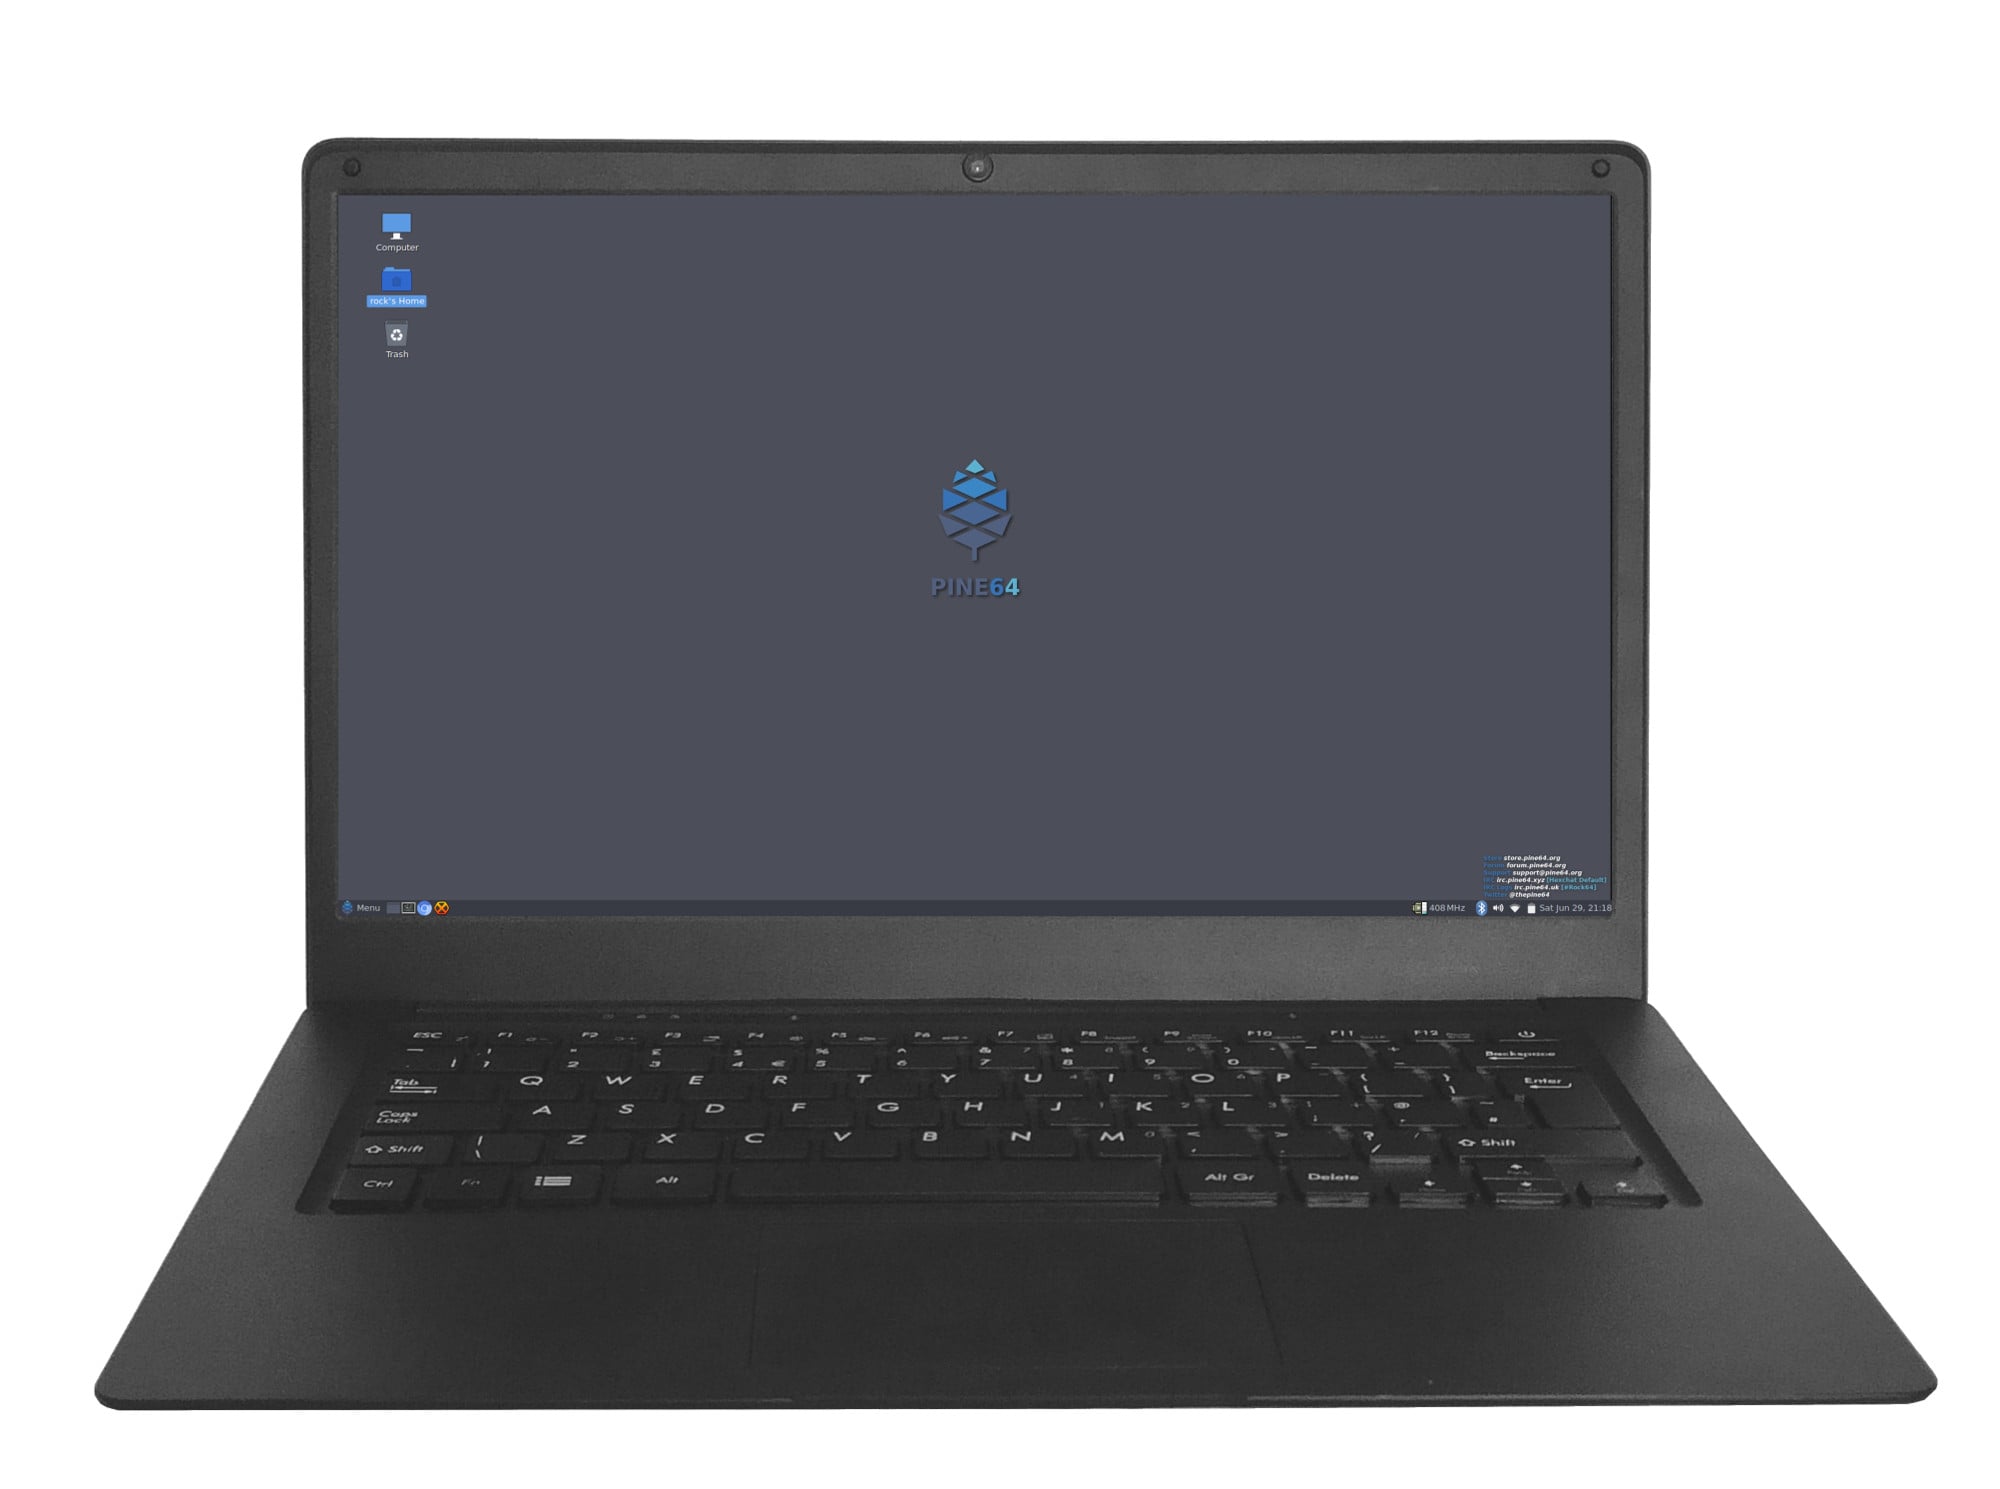 Pinebook Pro running Debian with MATE